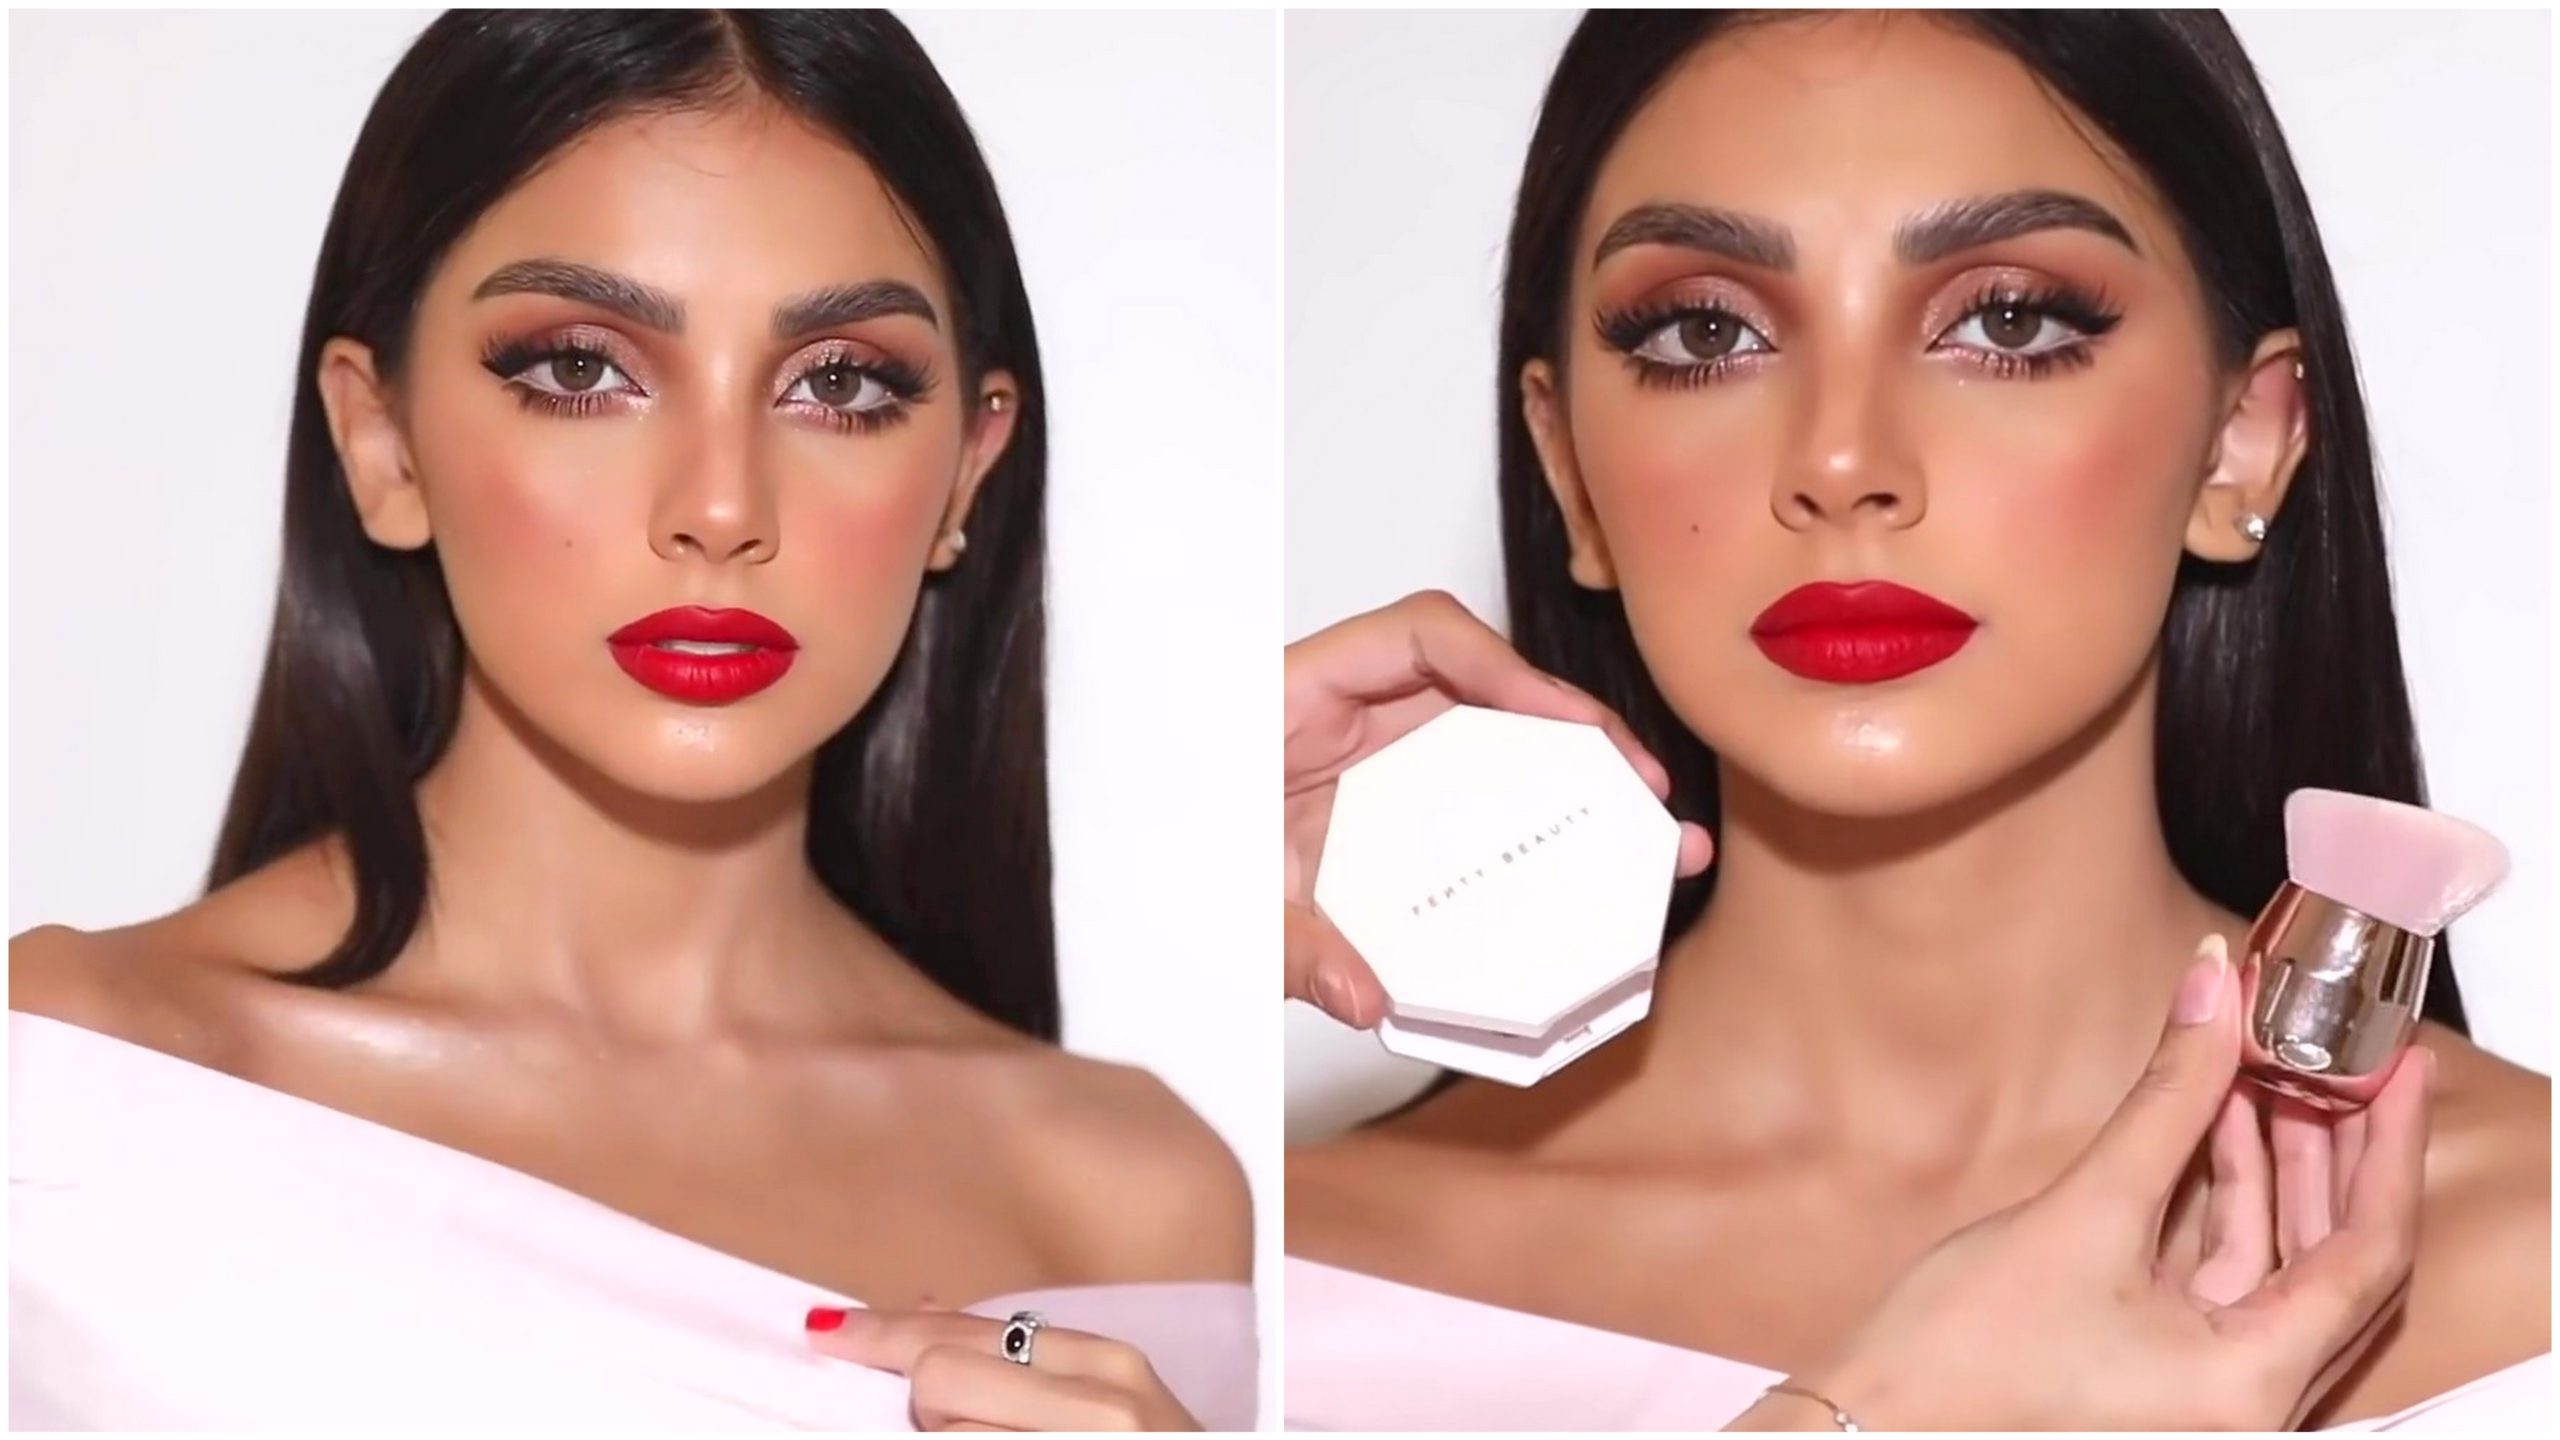 Red Makeup Tutorial: How to Apply Red Lipstick Mag